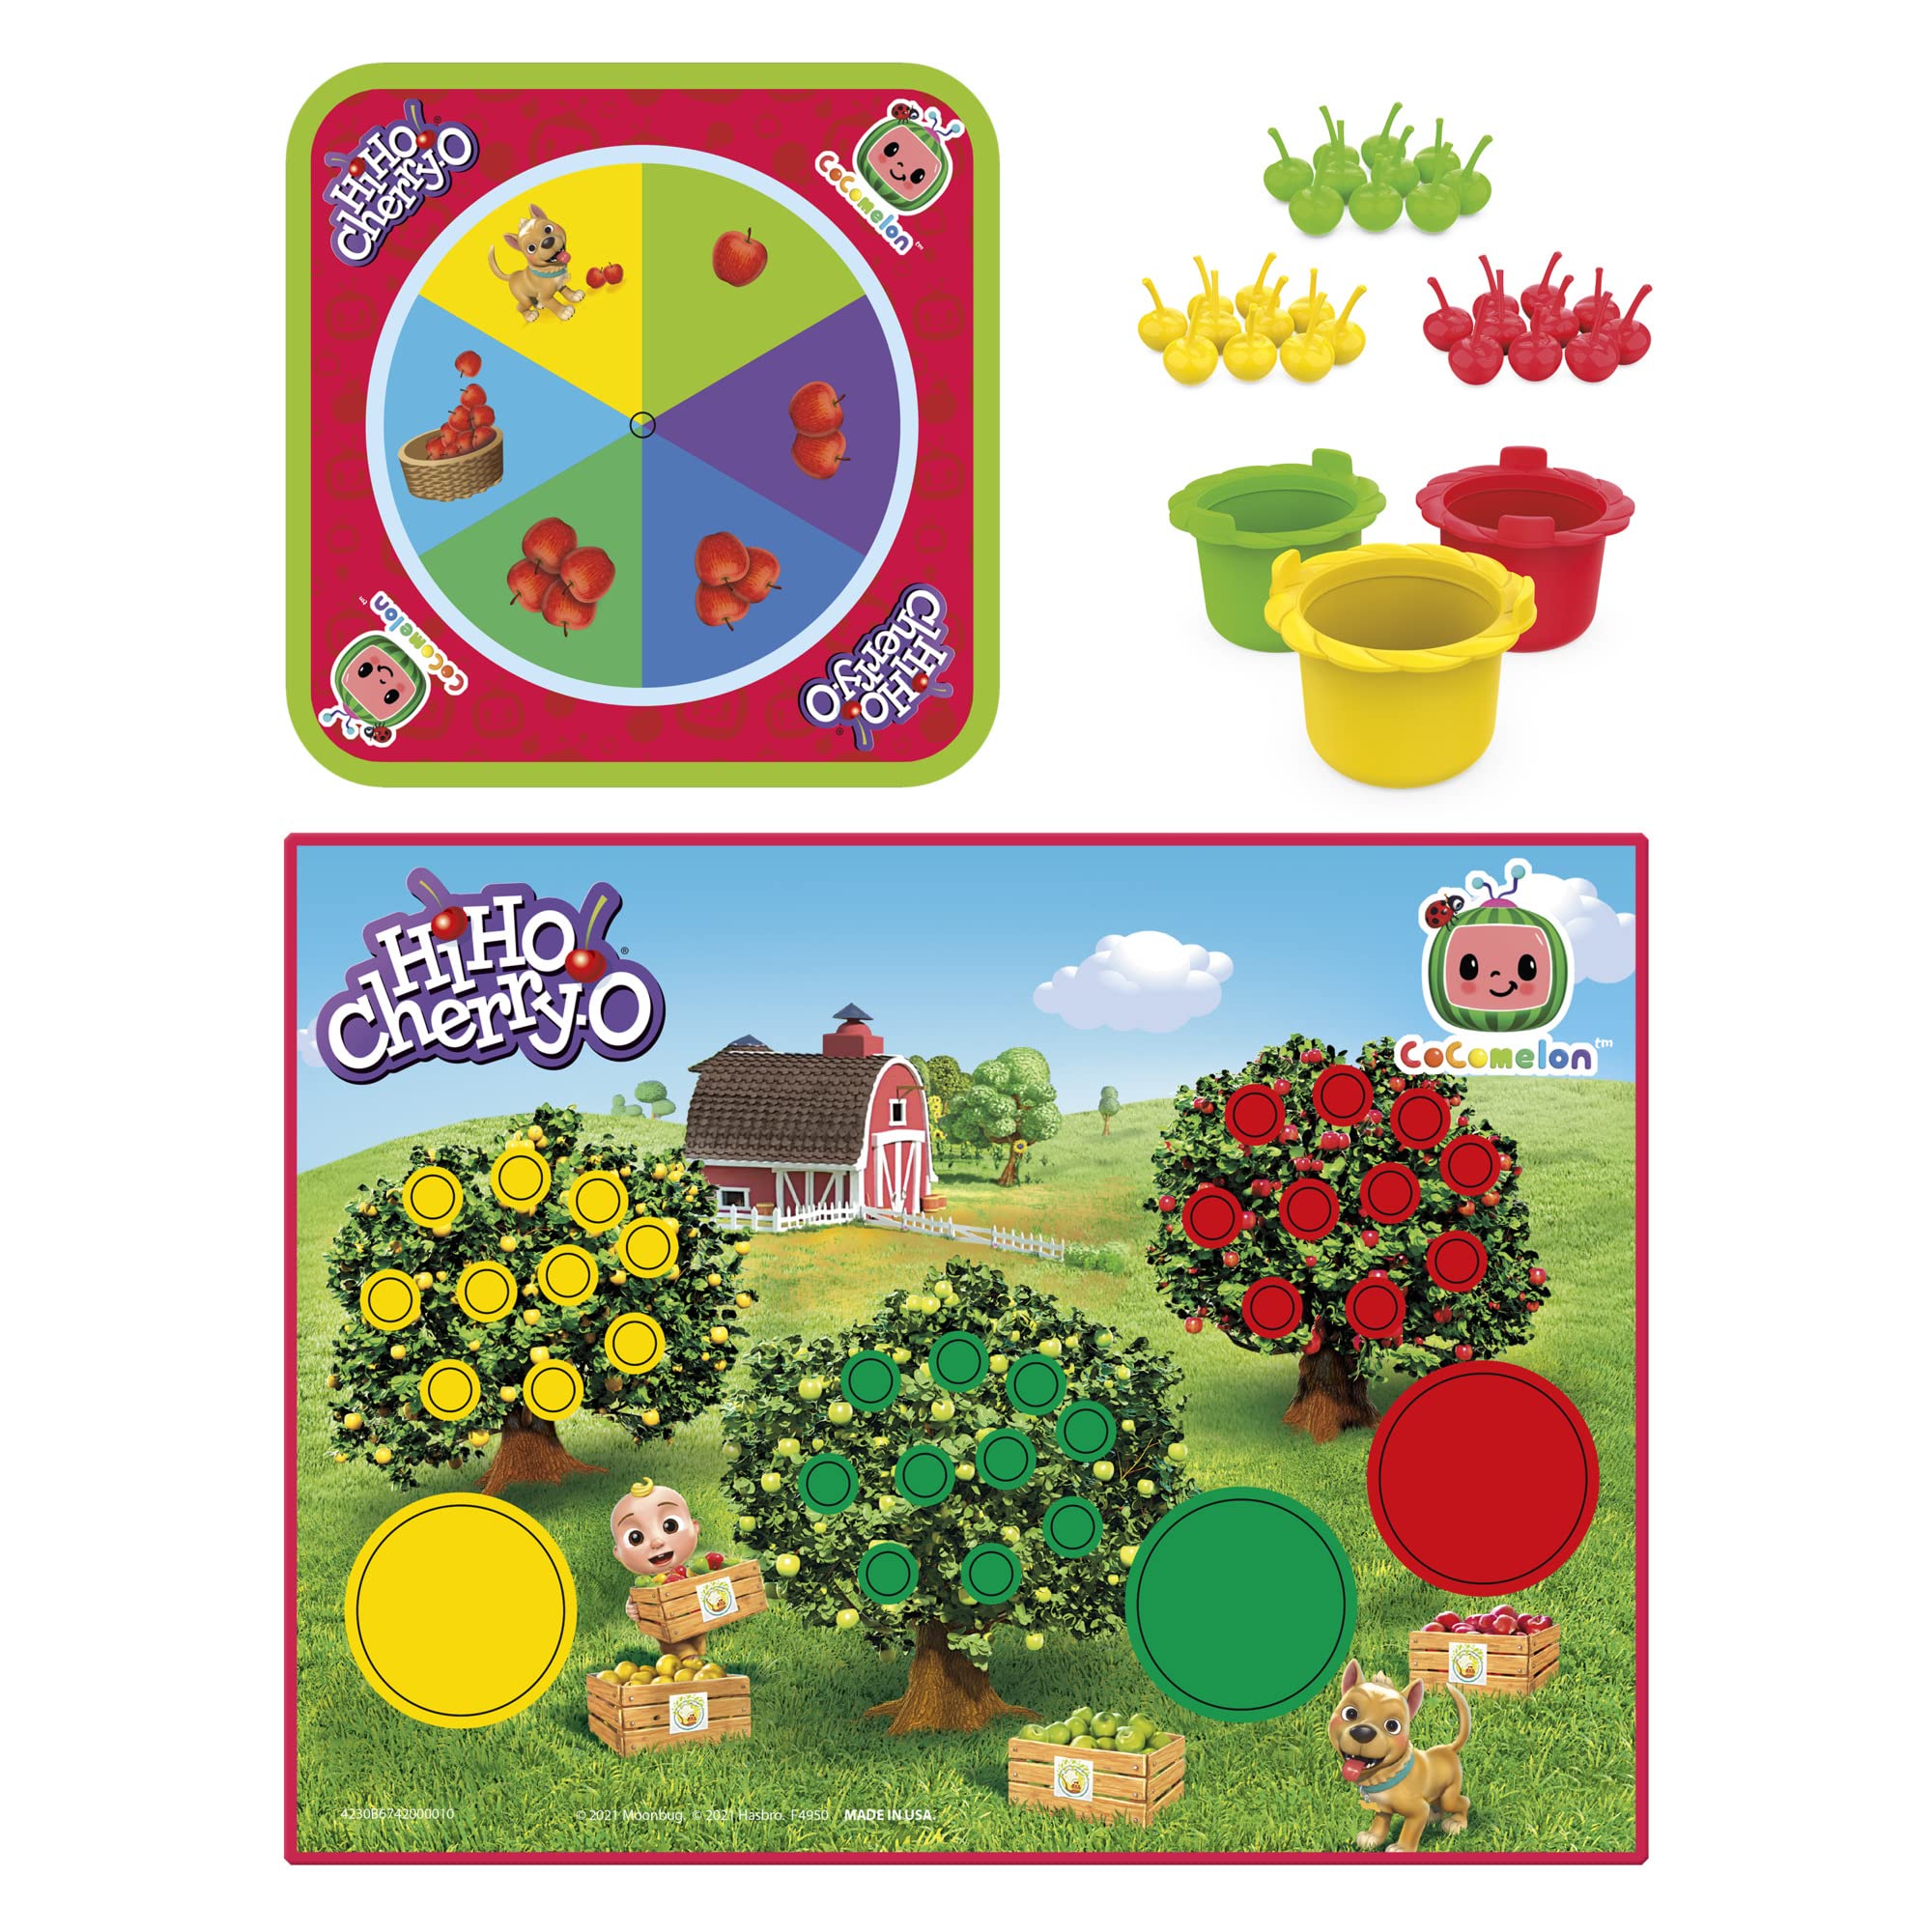 Hi Ho Cherry-O: CoComelon Edition Board Game, Counting, Numbers, and Matching Game for Preschoolers, Kids Ages 3 and Up, for 2-3 Players (Amazon Exclusive)